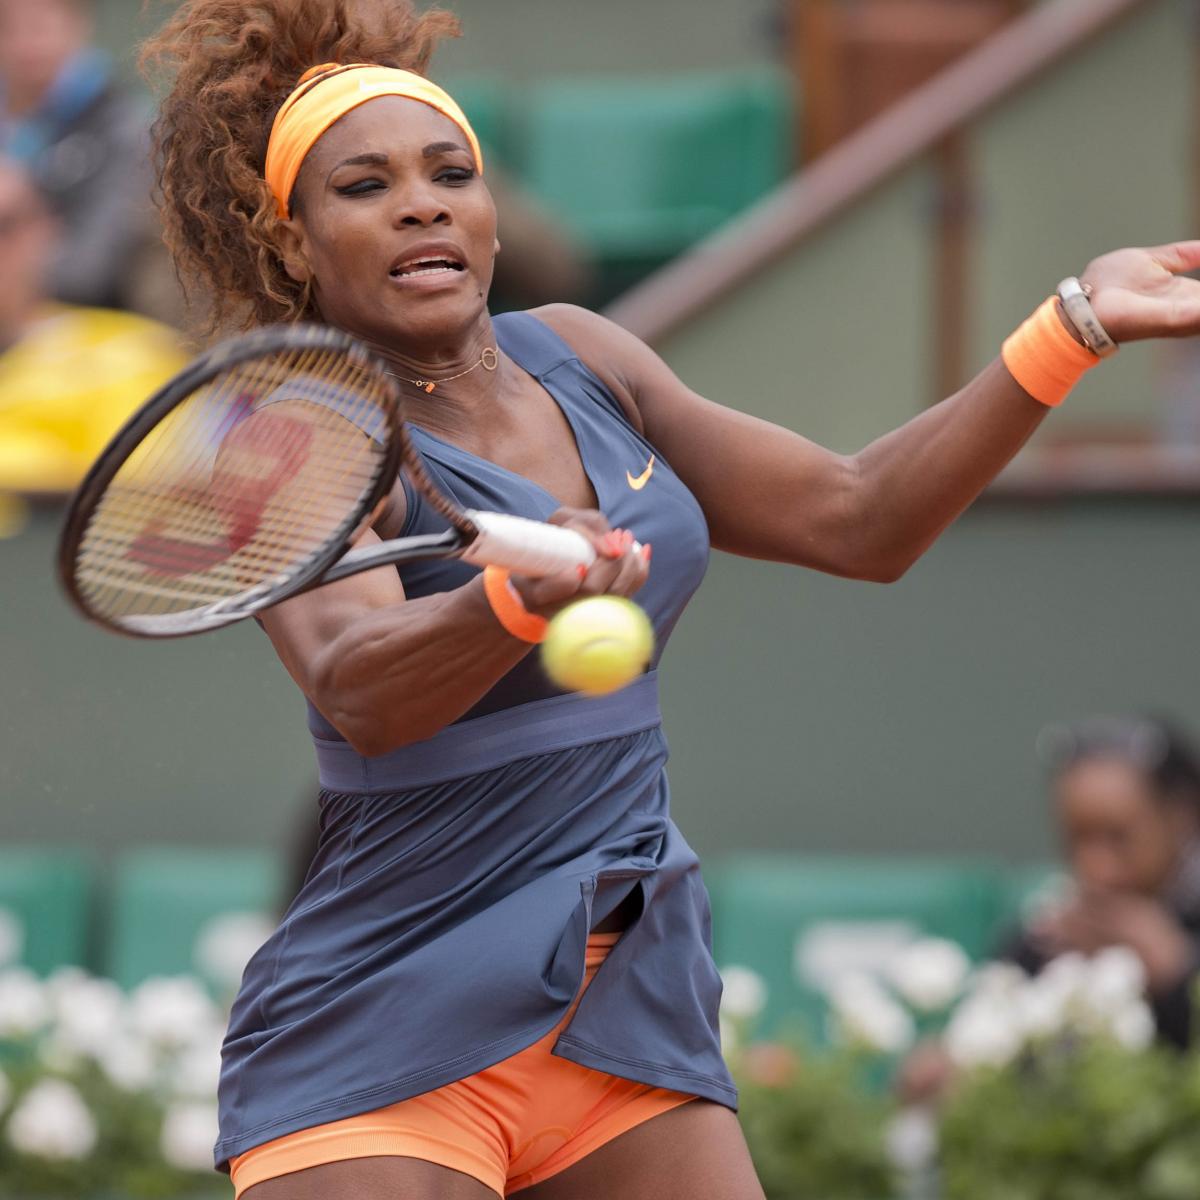 French Open 2013 Results: Serena Williams and Top Stars Dominating Roland Garros ...